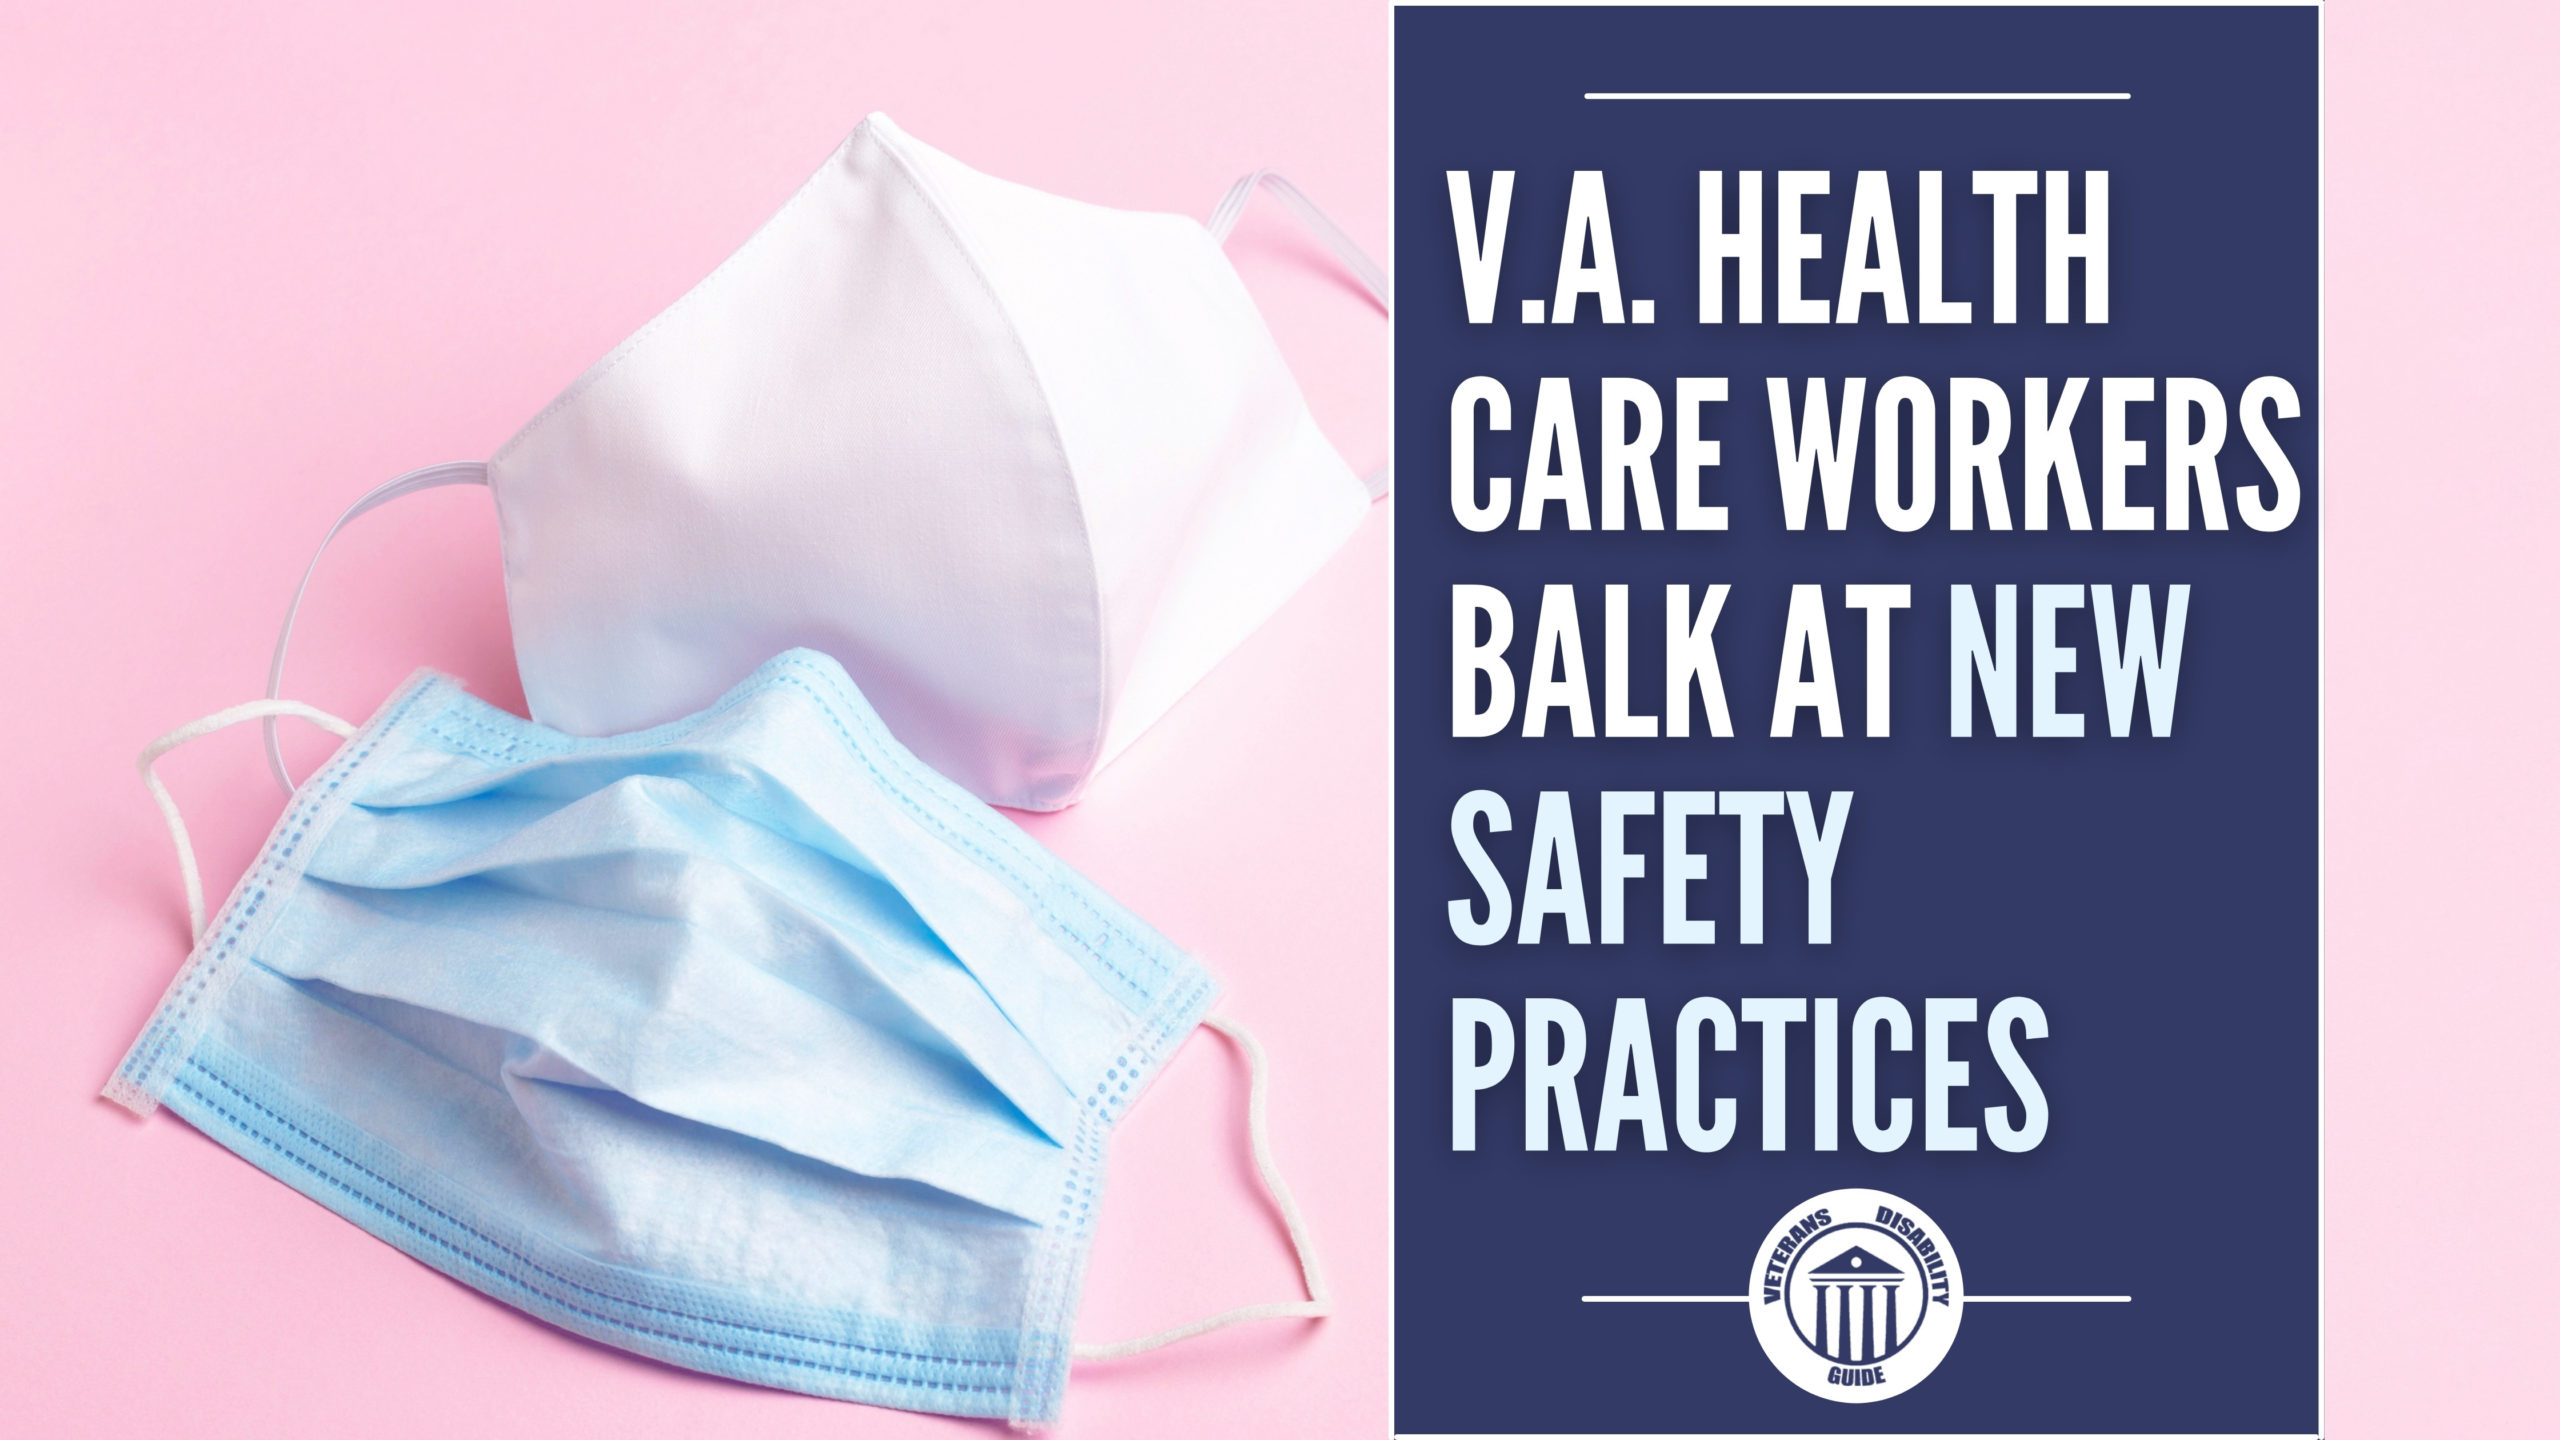 V.A. Health Care Workers Balk at New Safety Practices blog header image